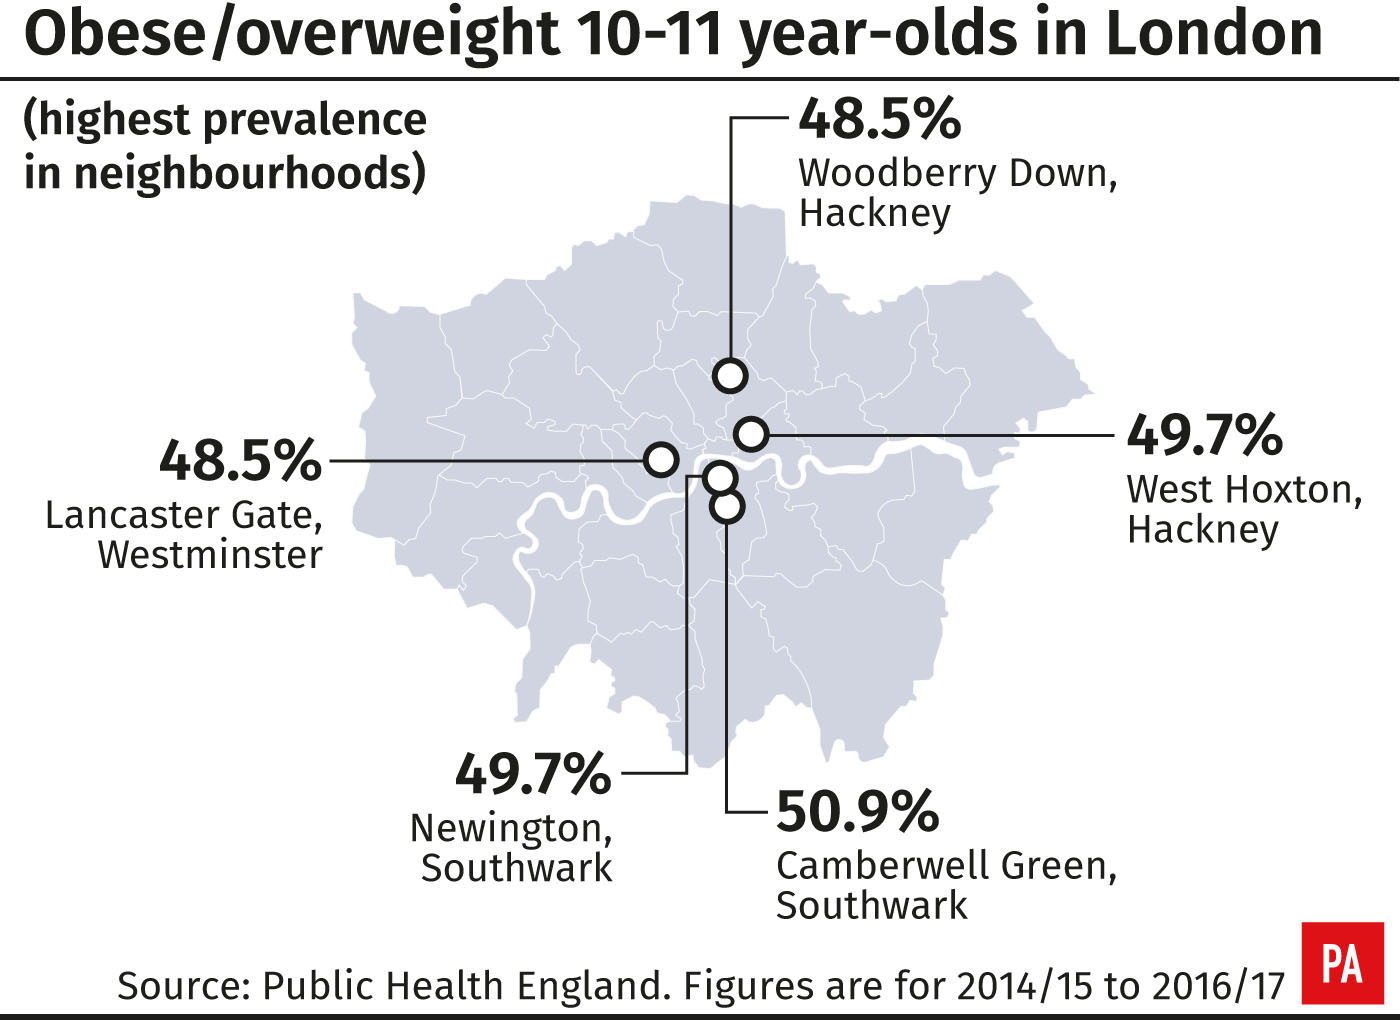 Obese/overweight 10-11-year-olds in London